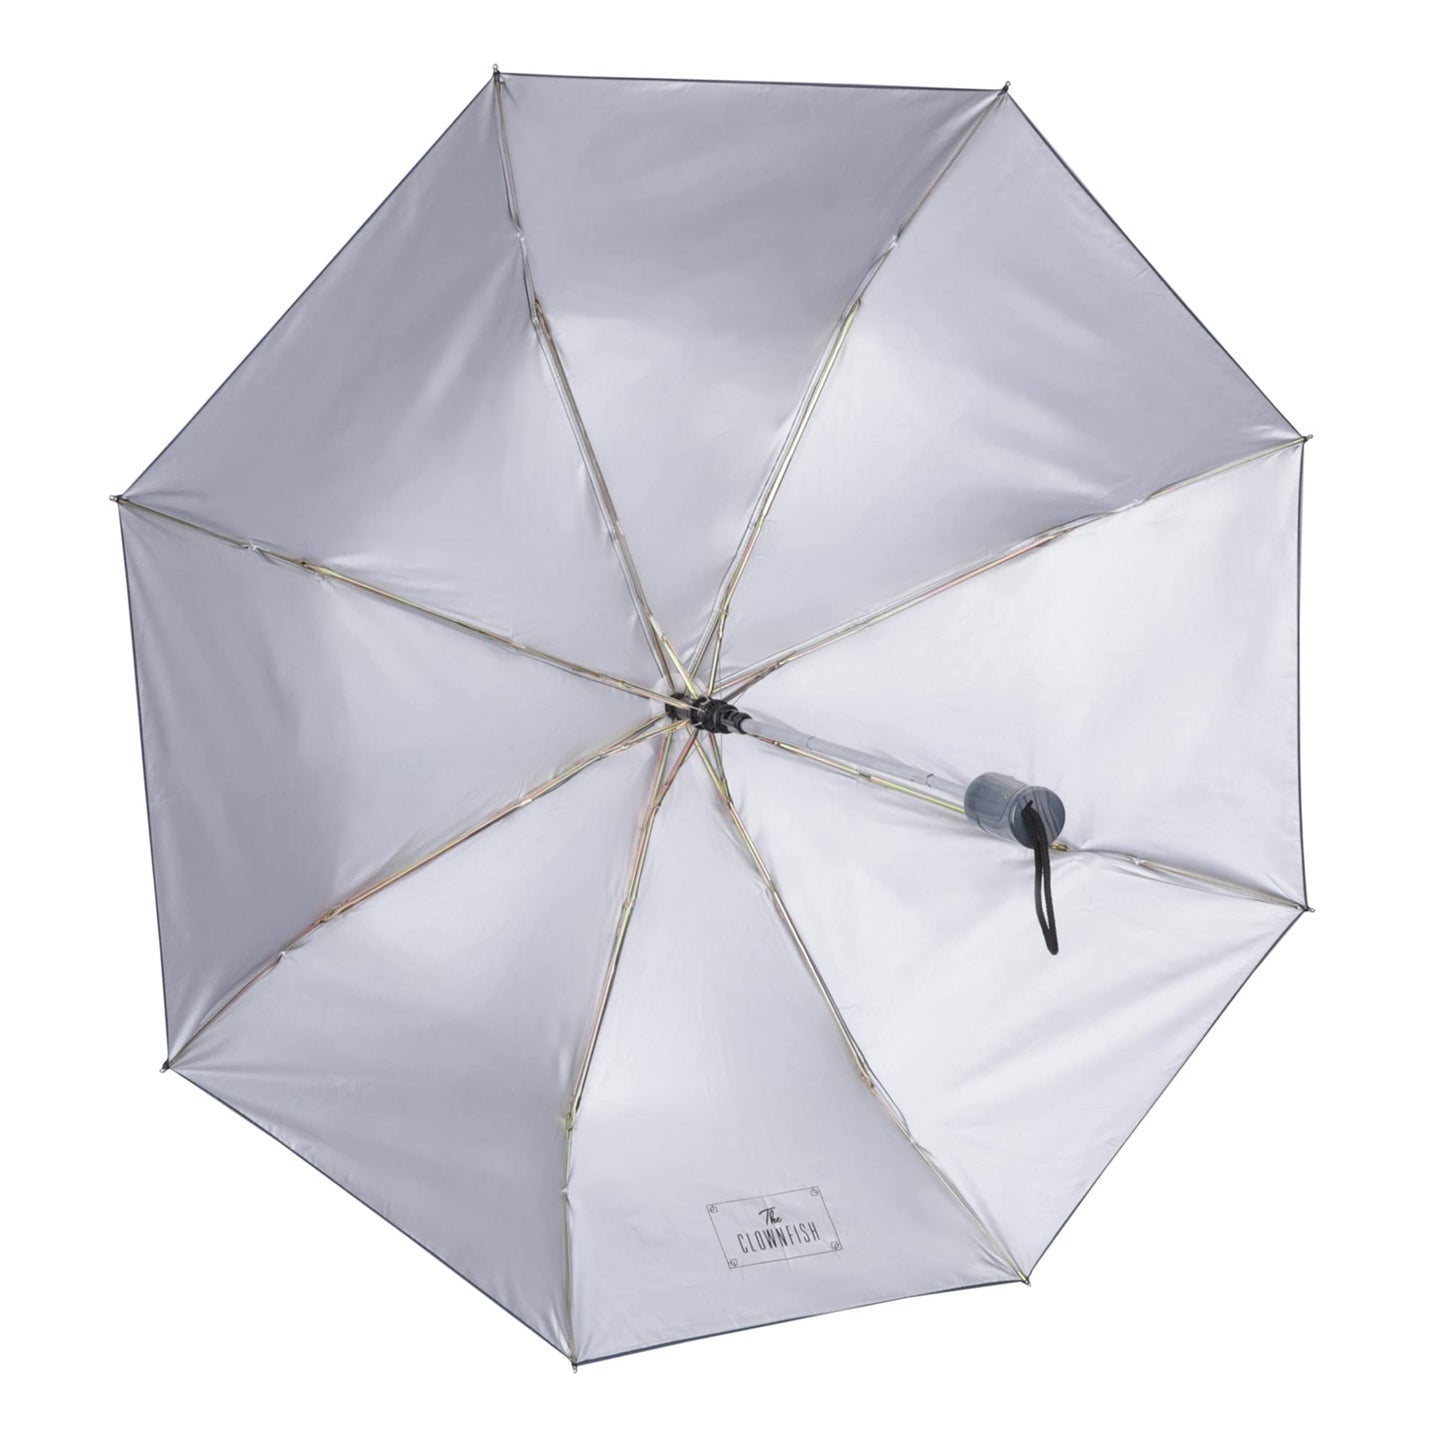 THE CLOWNFISH Umbrella 3 Fold Auto Open Waterproof 190 T Polyester Double Coated Silver Lined Umbrellas For Men and Women (Printed Design- Brick Red)